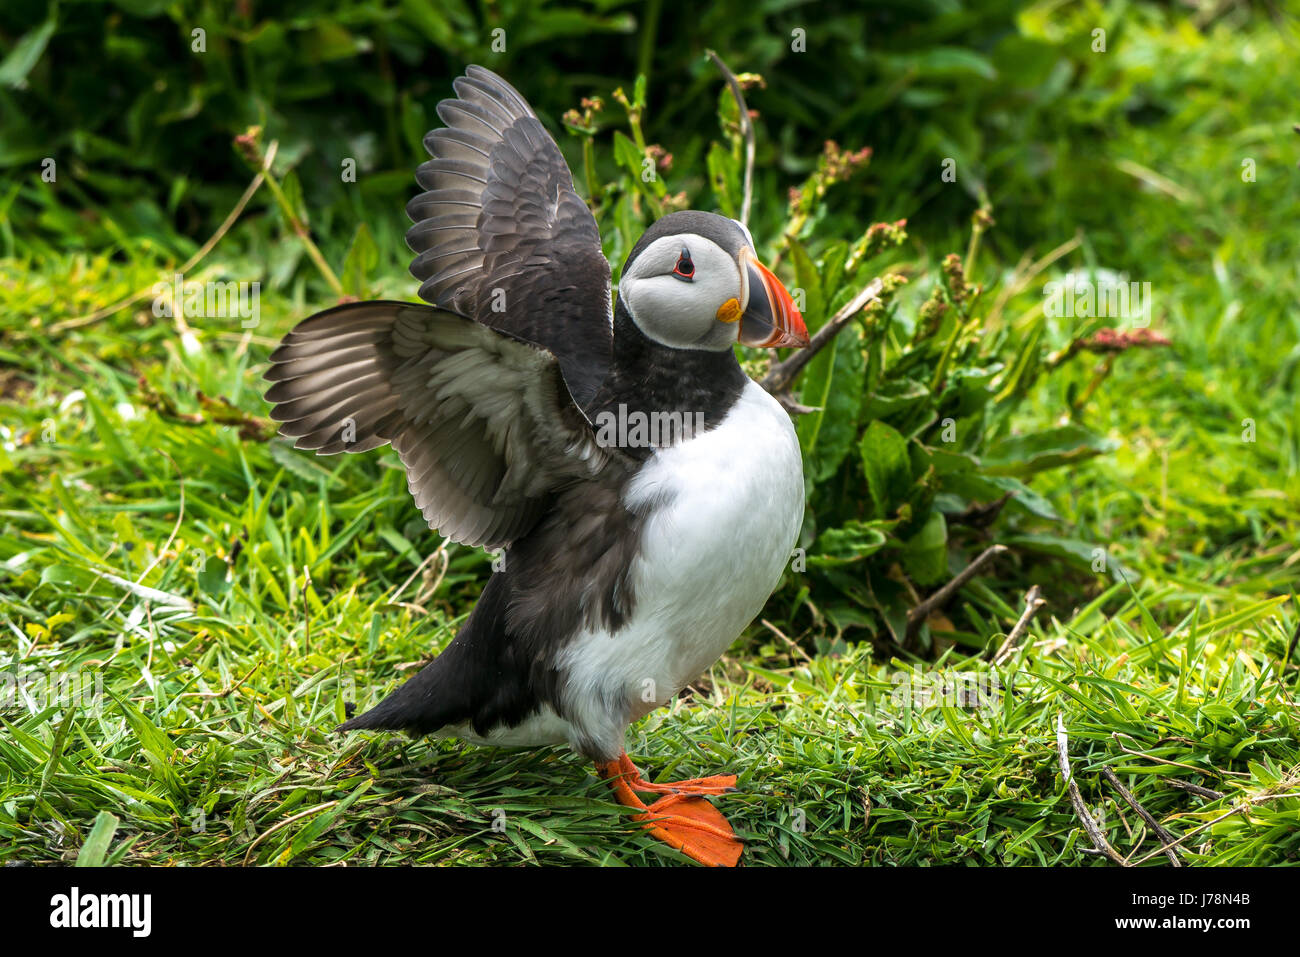 Close up of Atlantic Puffin, Fratercula arctica, in grass with wings outstretched flapping, Inner Farne, Farne Islands, Northumberland, England, UK Stock Photo